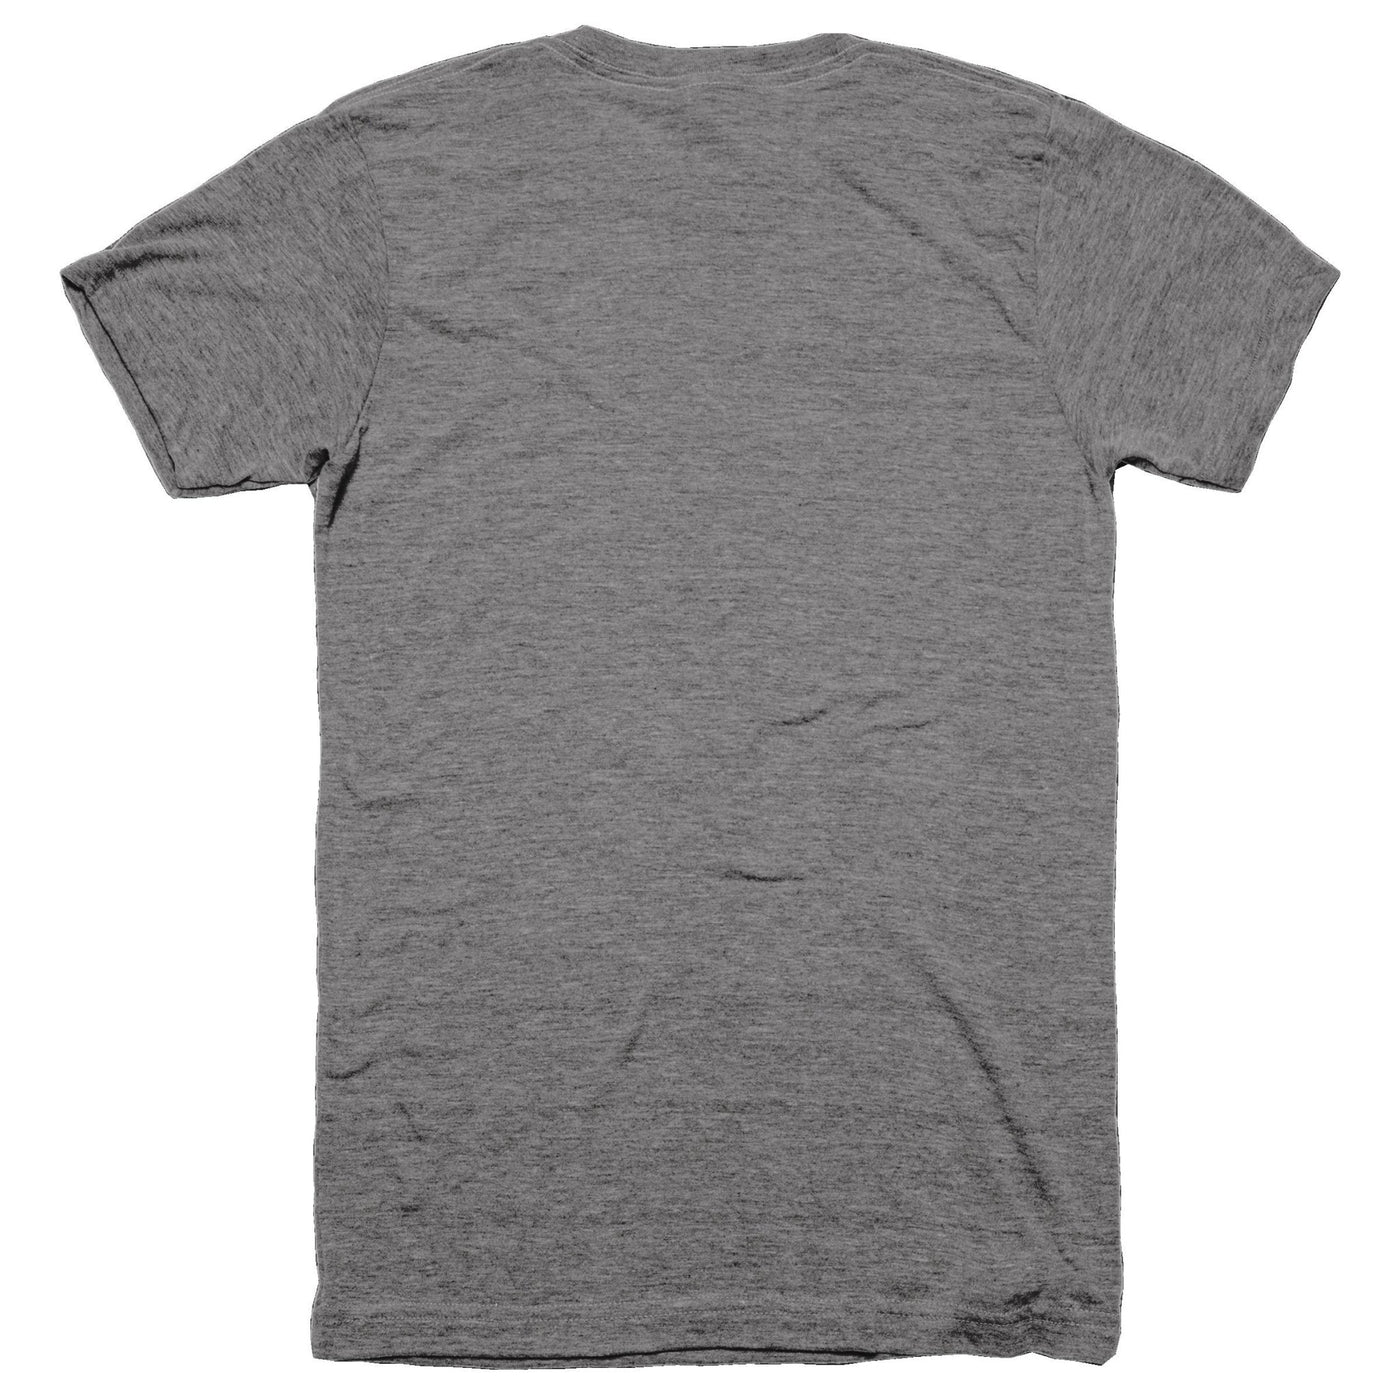 What I'm After Can't be Purchased - on Grey Tee - Conquering Barbell